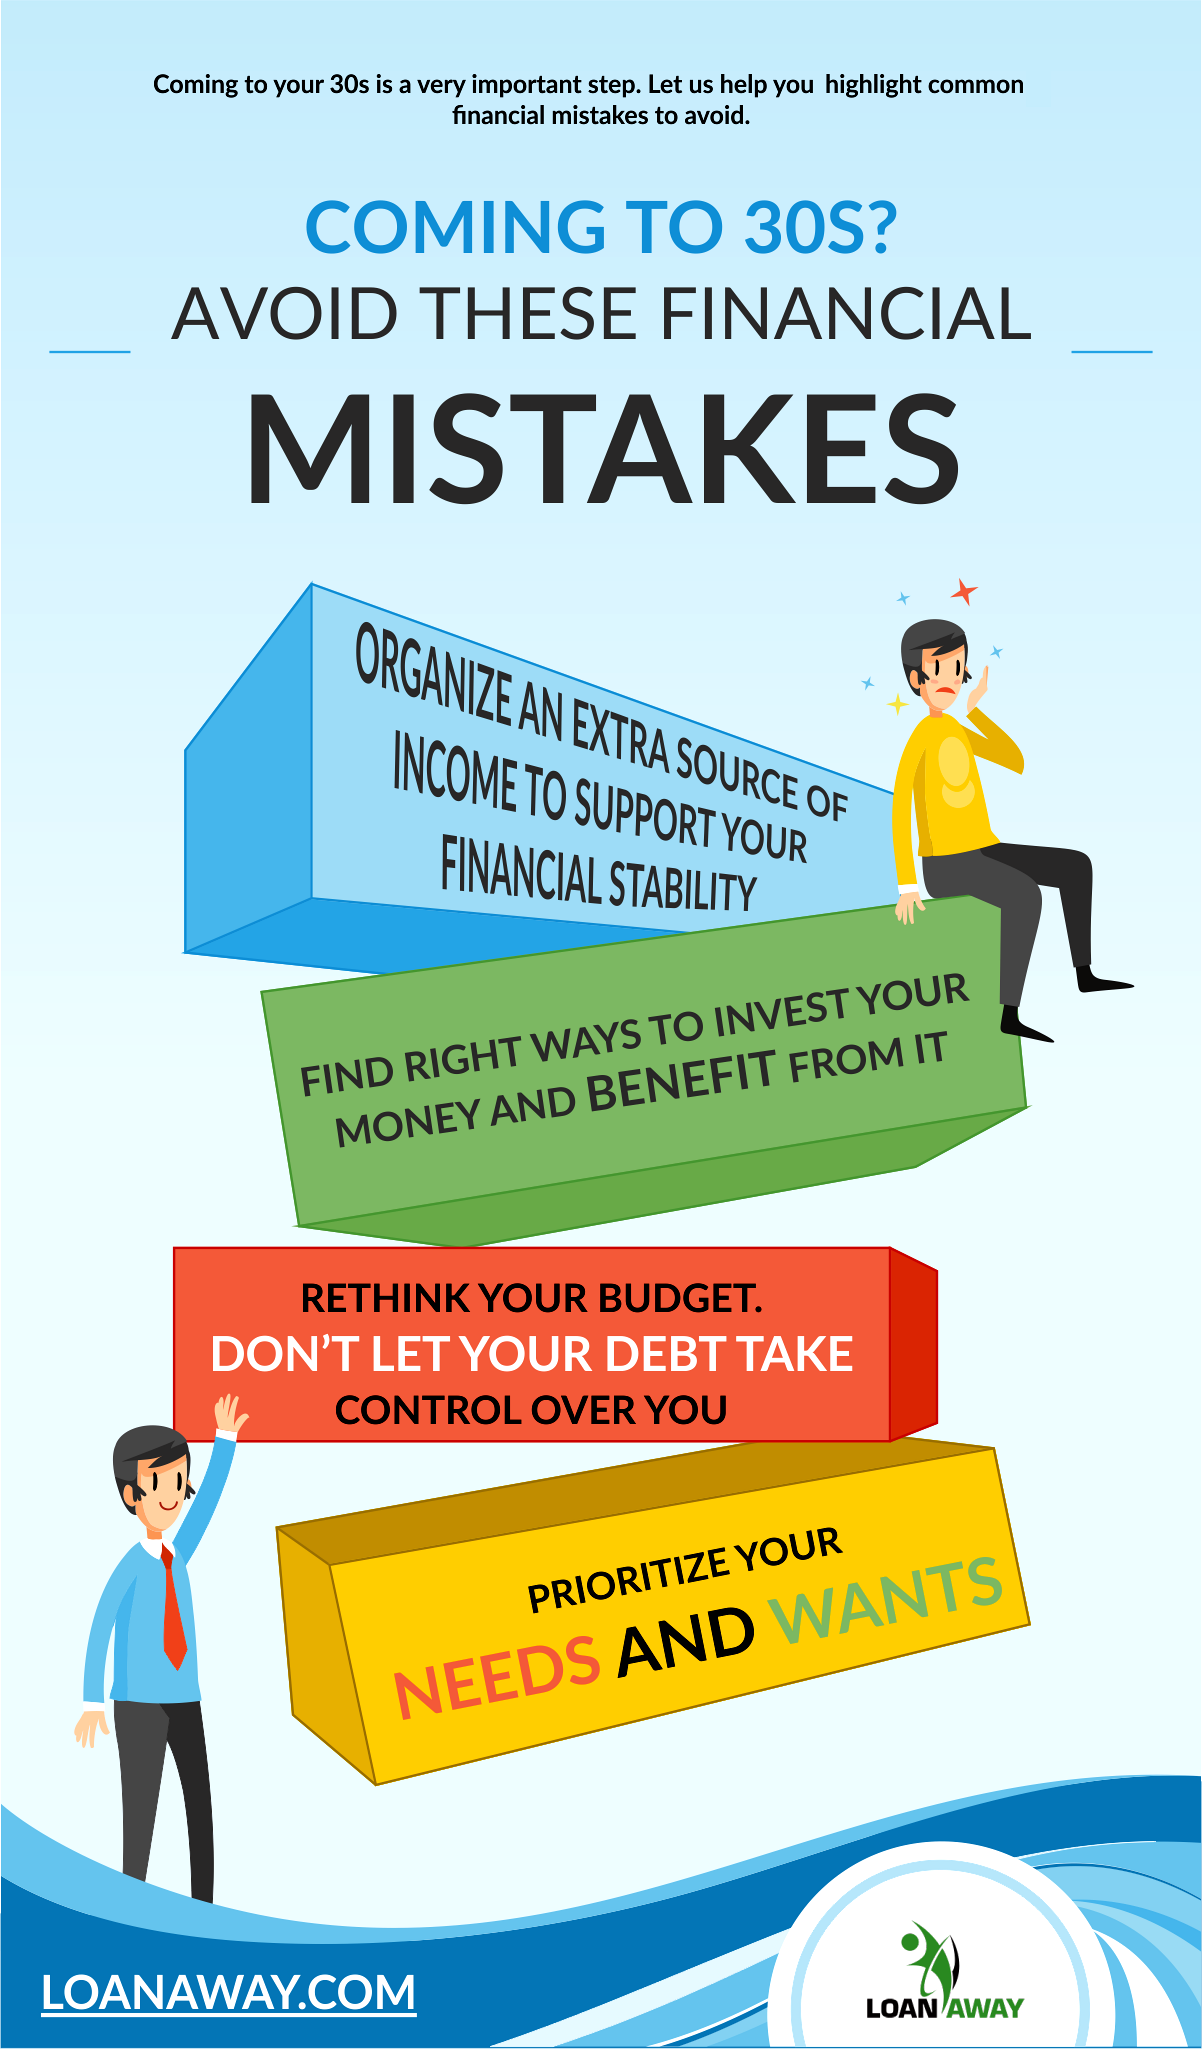 Coming to your 30s is a very important step. Let us help you to highlight common financial mistakes to avoid.